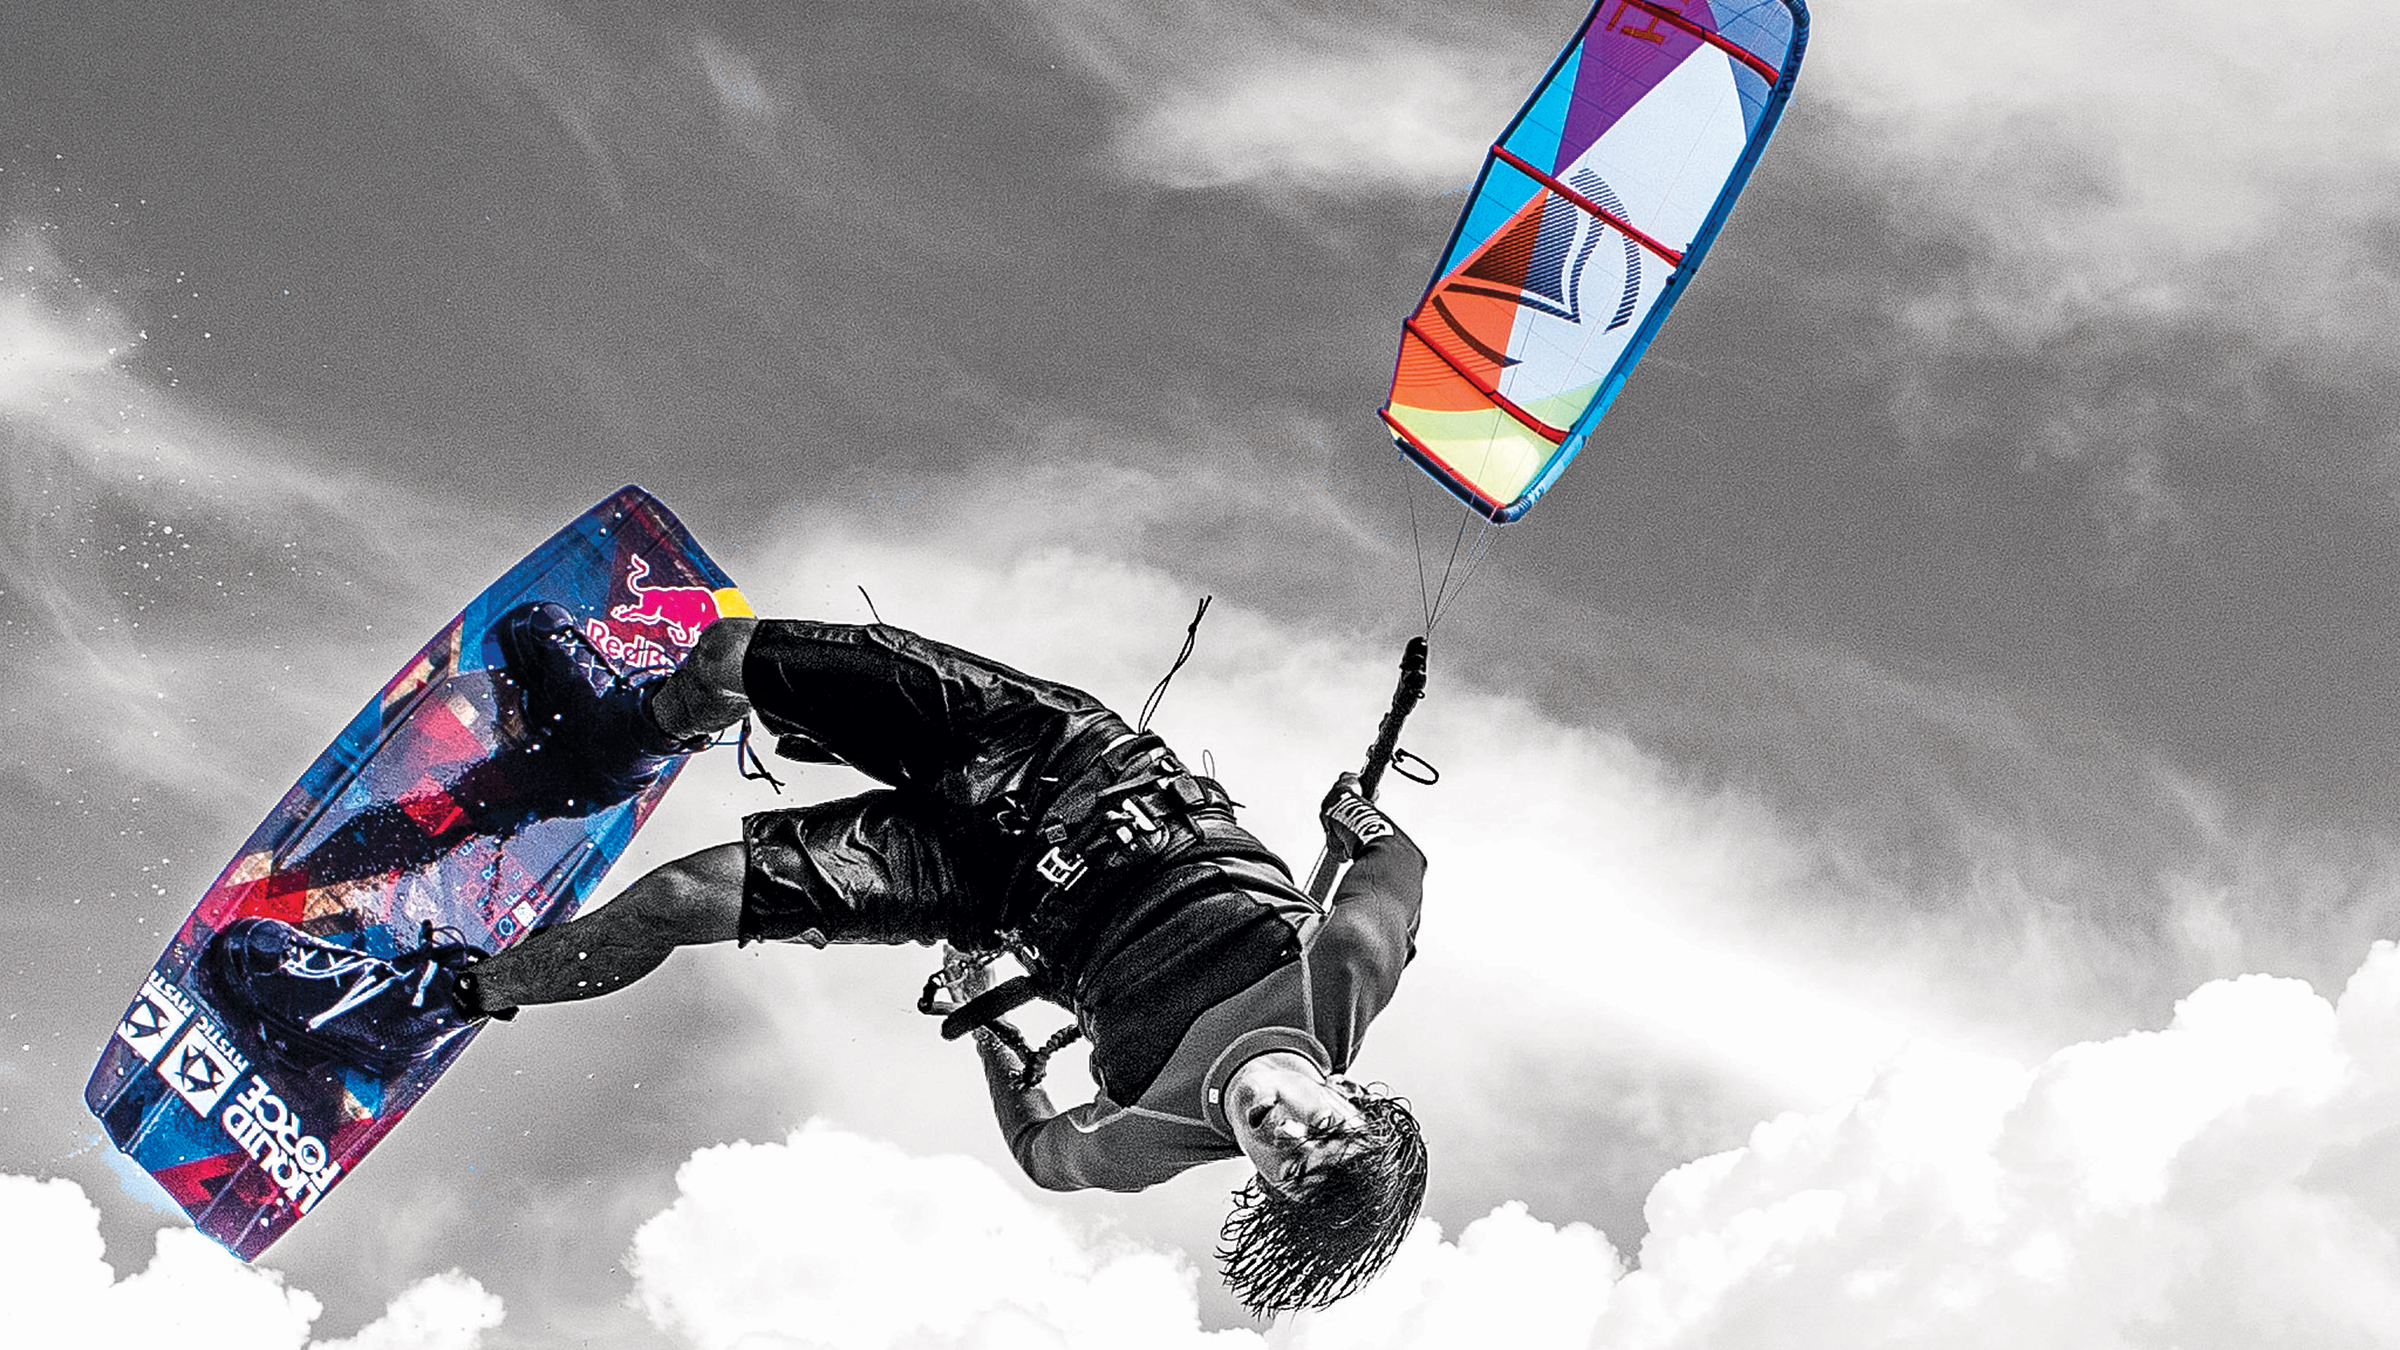 kitesurf wallpaper image - Cristophe Tack inverted handle pass on the 2015 Liquid Force HIFI X - in resolution: High Definition - HD 16:9 2400 X 1350